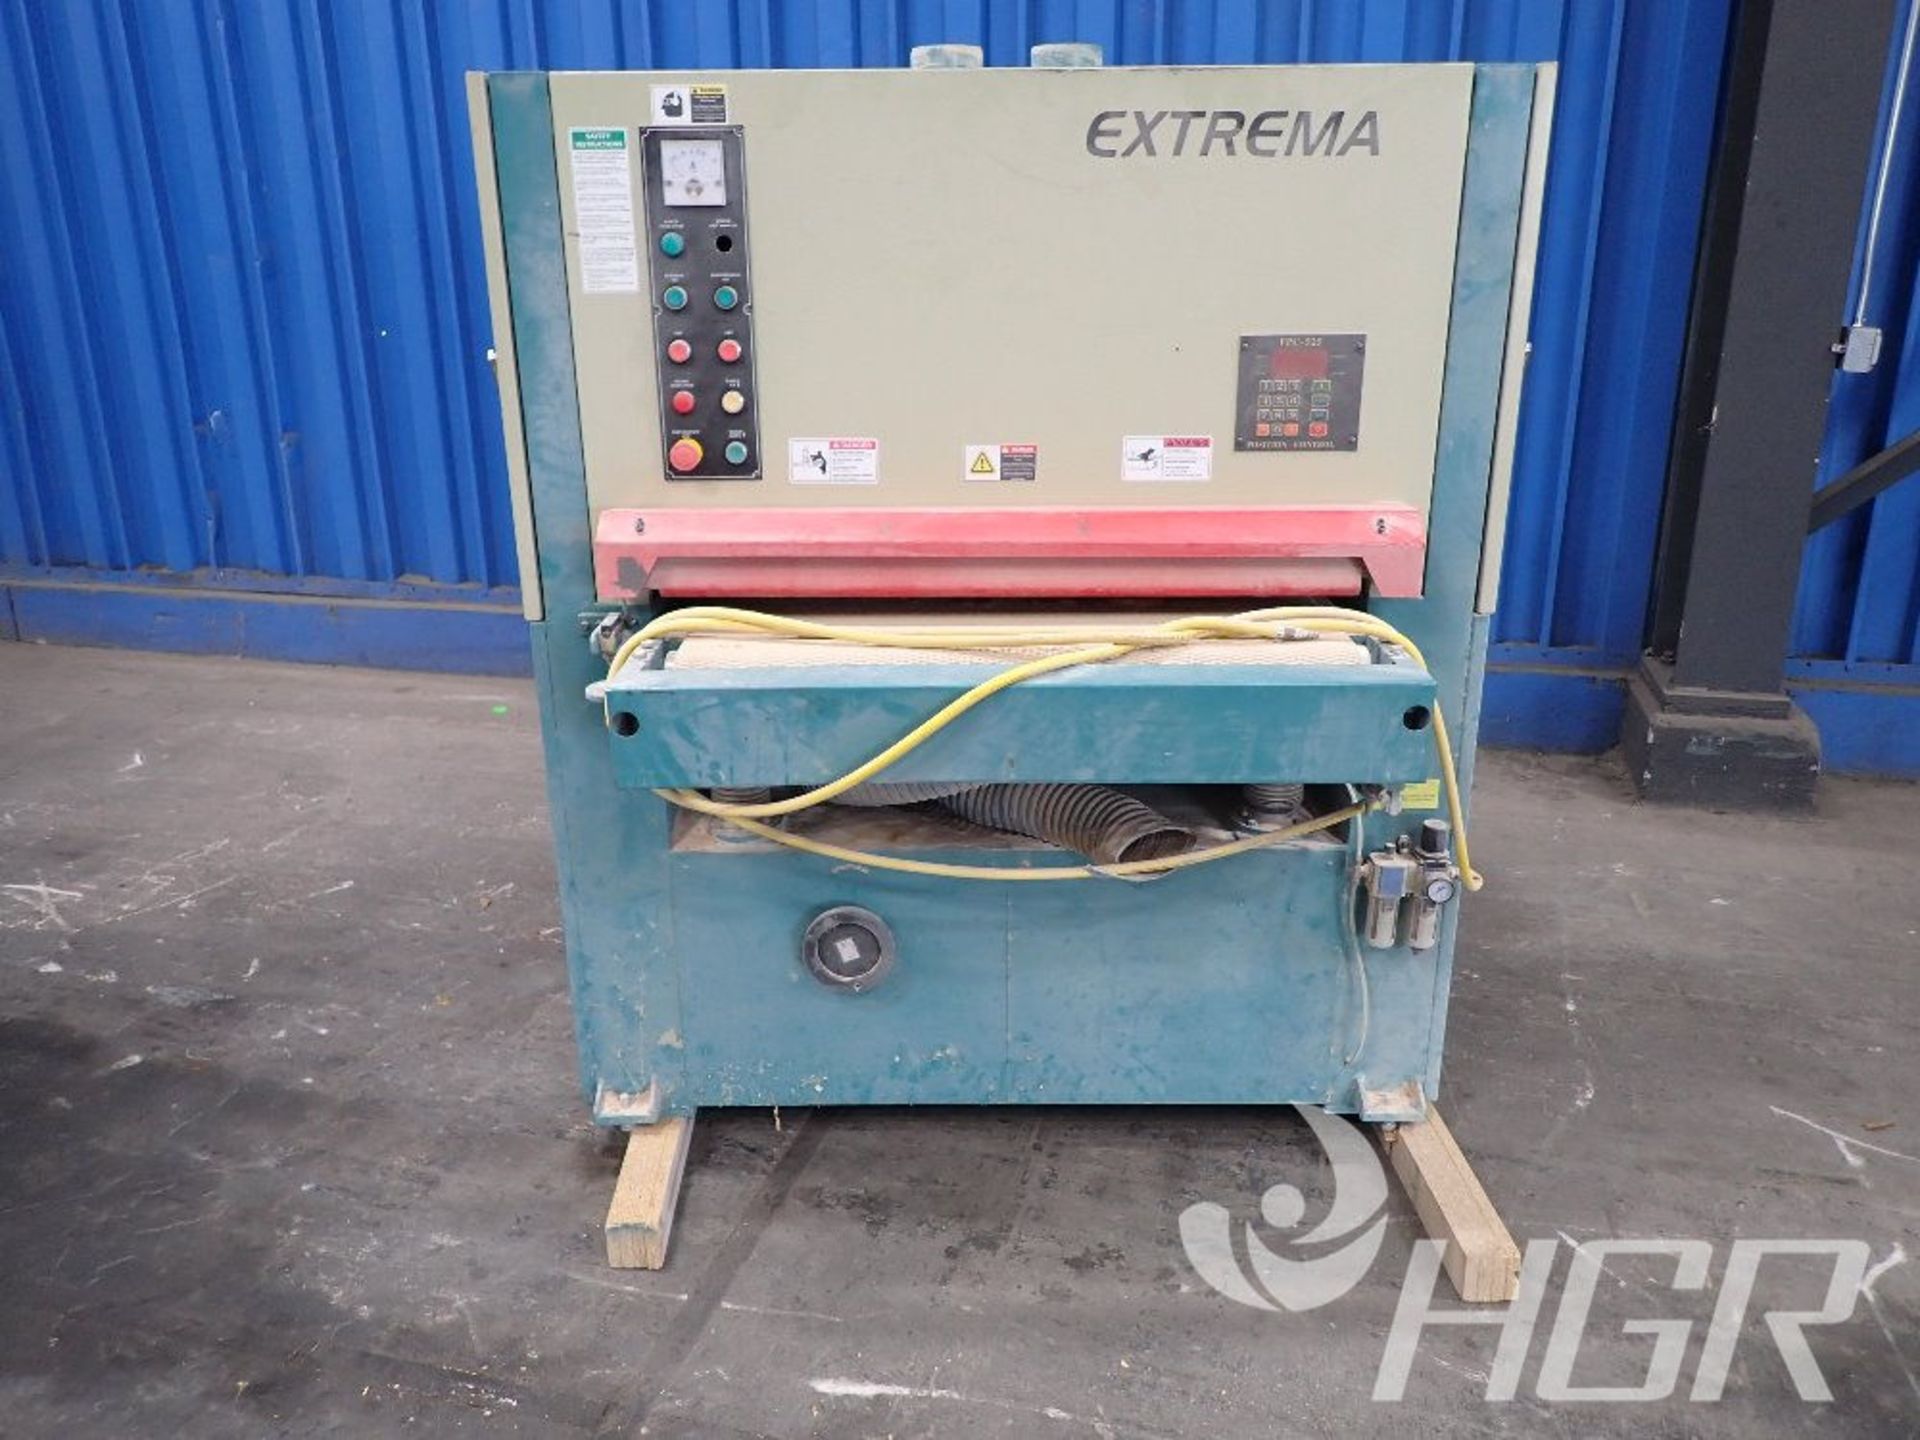 EXTREMA SANDER, Model XS-1A37/2, Date: 2008; s/n 2300804176, Approx. Capacity: 42X36, Power: n/a, - Image 2 of 13